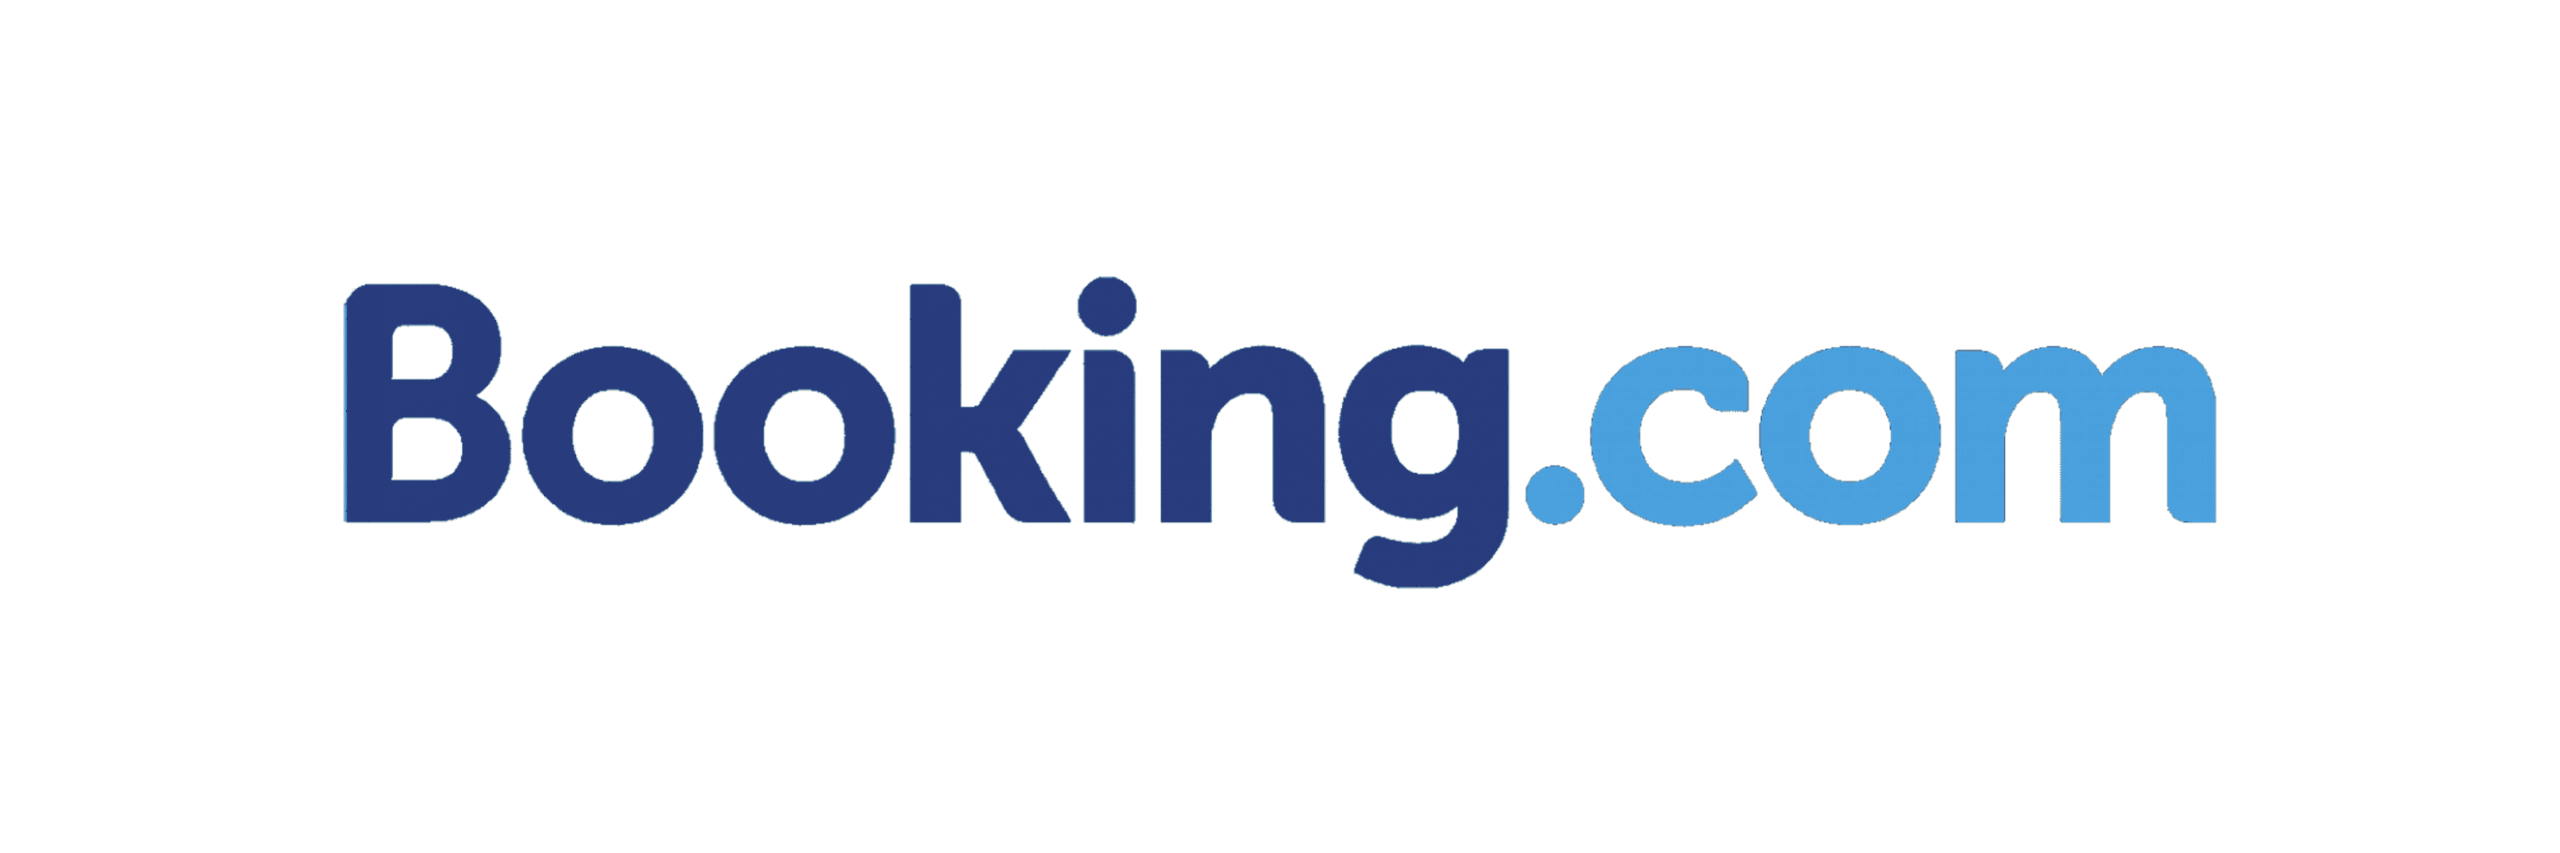 Booking.com: Statement Addressing Payment Concerns for Self-Catering Property Owners